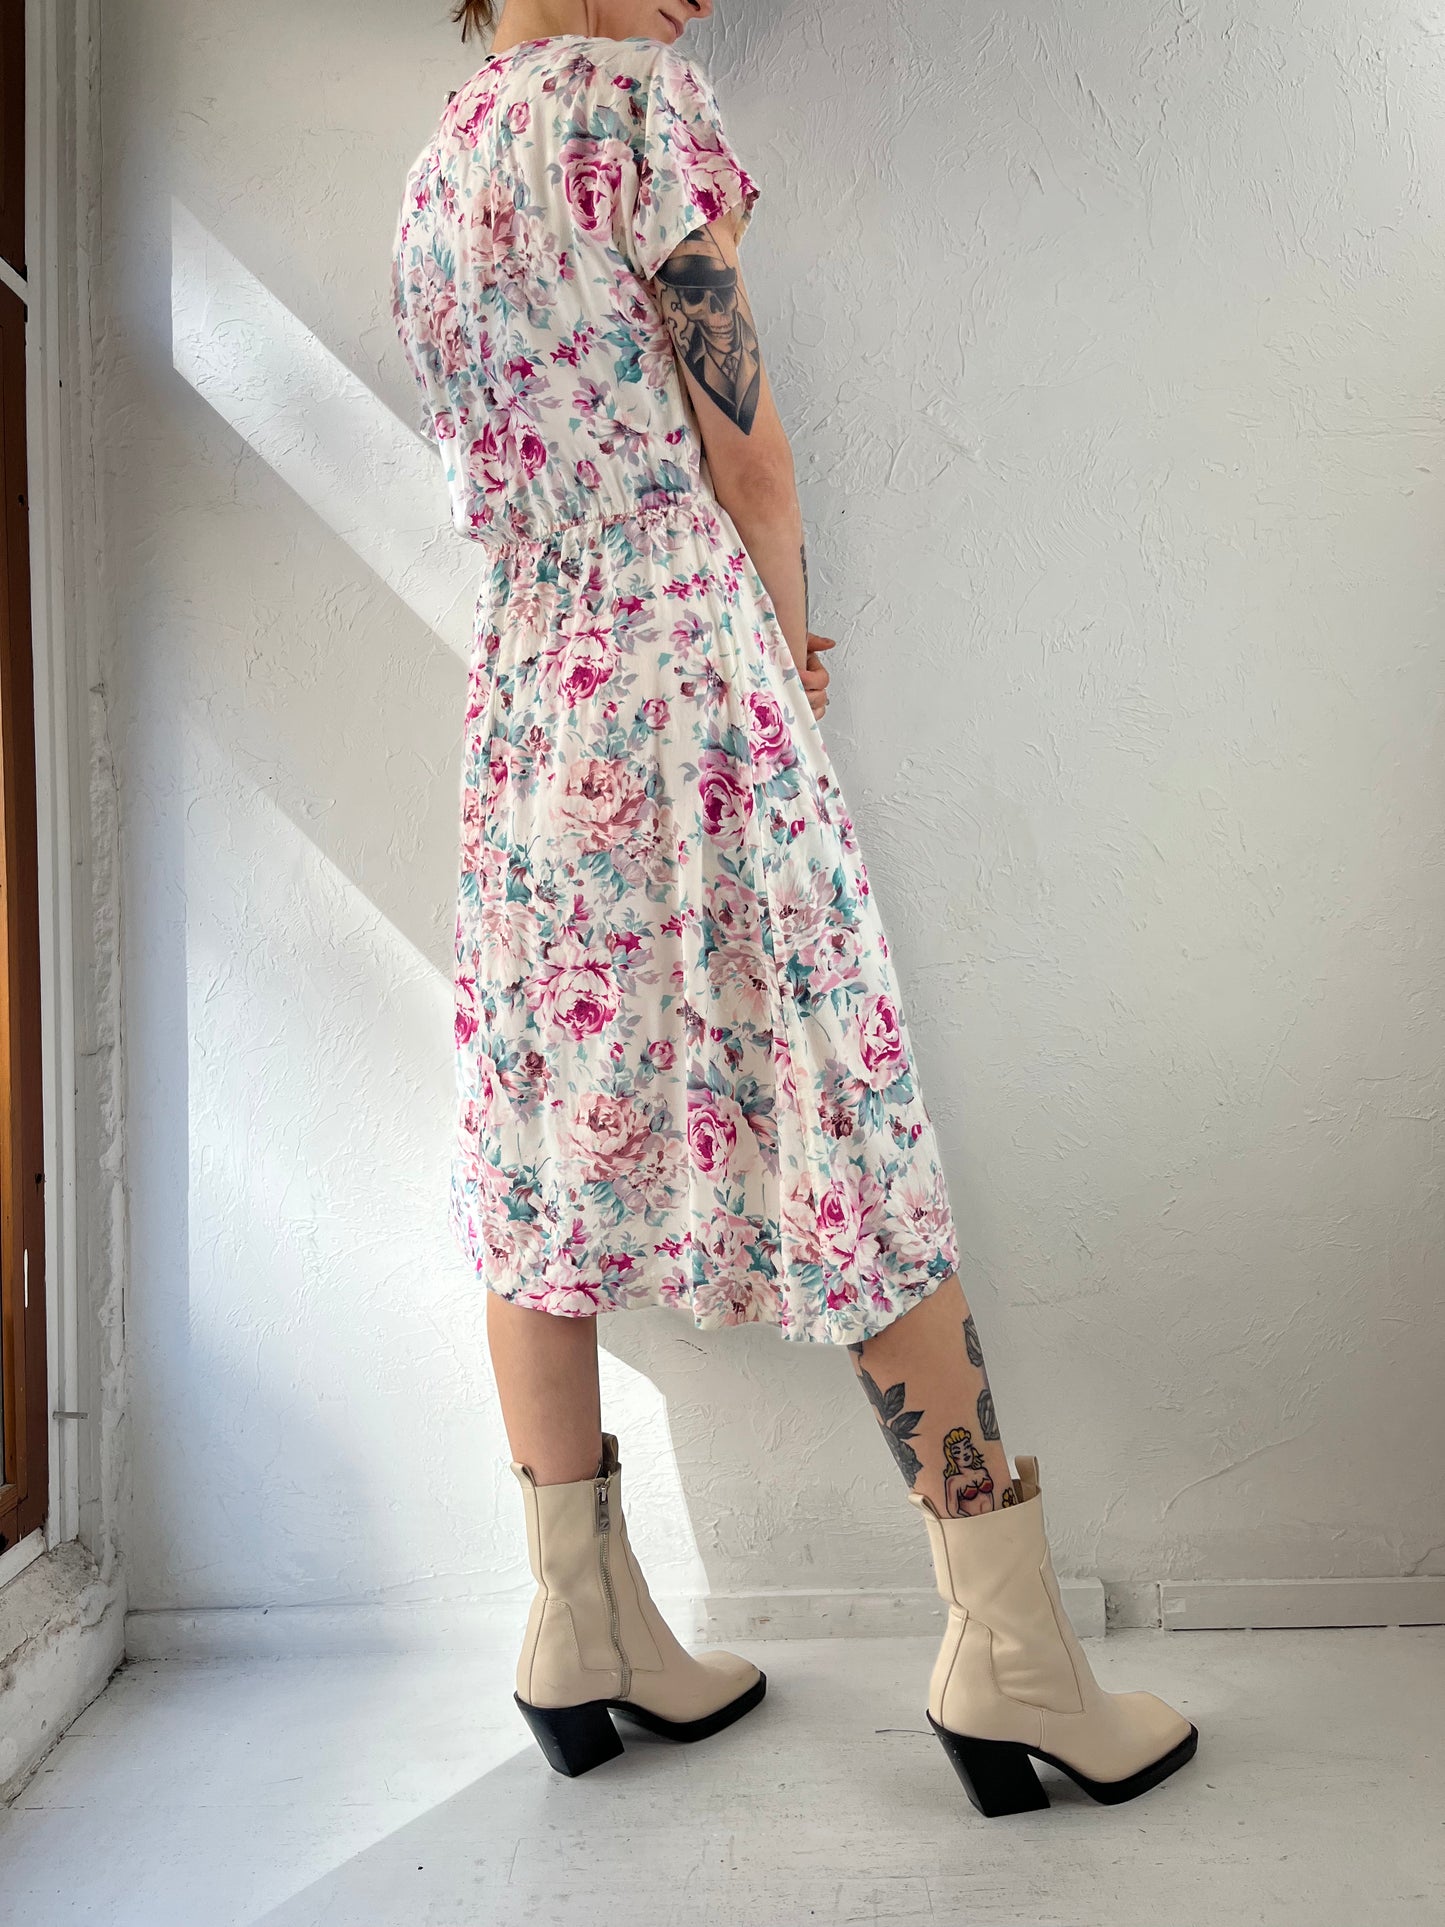 90s 'Carole Reed' Floral Rayon Dress / 10